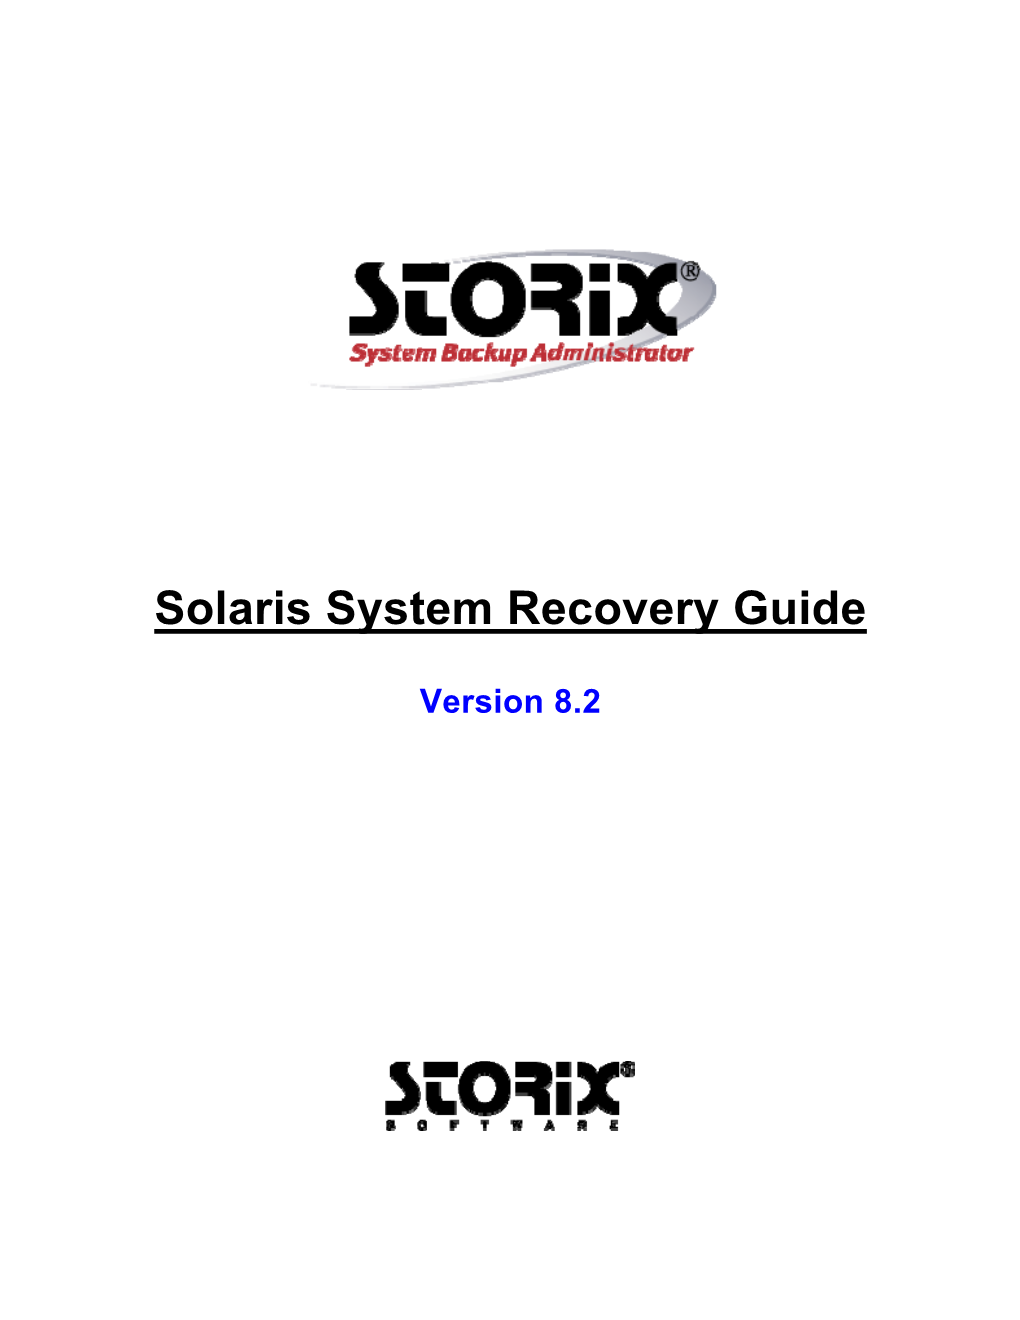 Sbadmin for Solaris System Recovery Guide Is a Supplement to the Sbadmin User Guide, Providing Details on Reinstalling a Solaris System from a Sbadmin System Backup